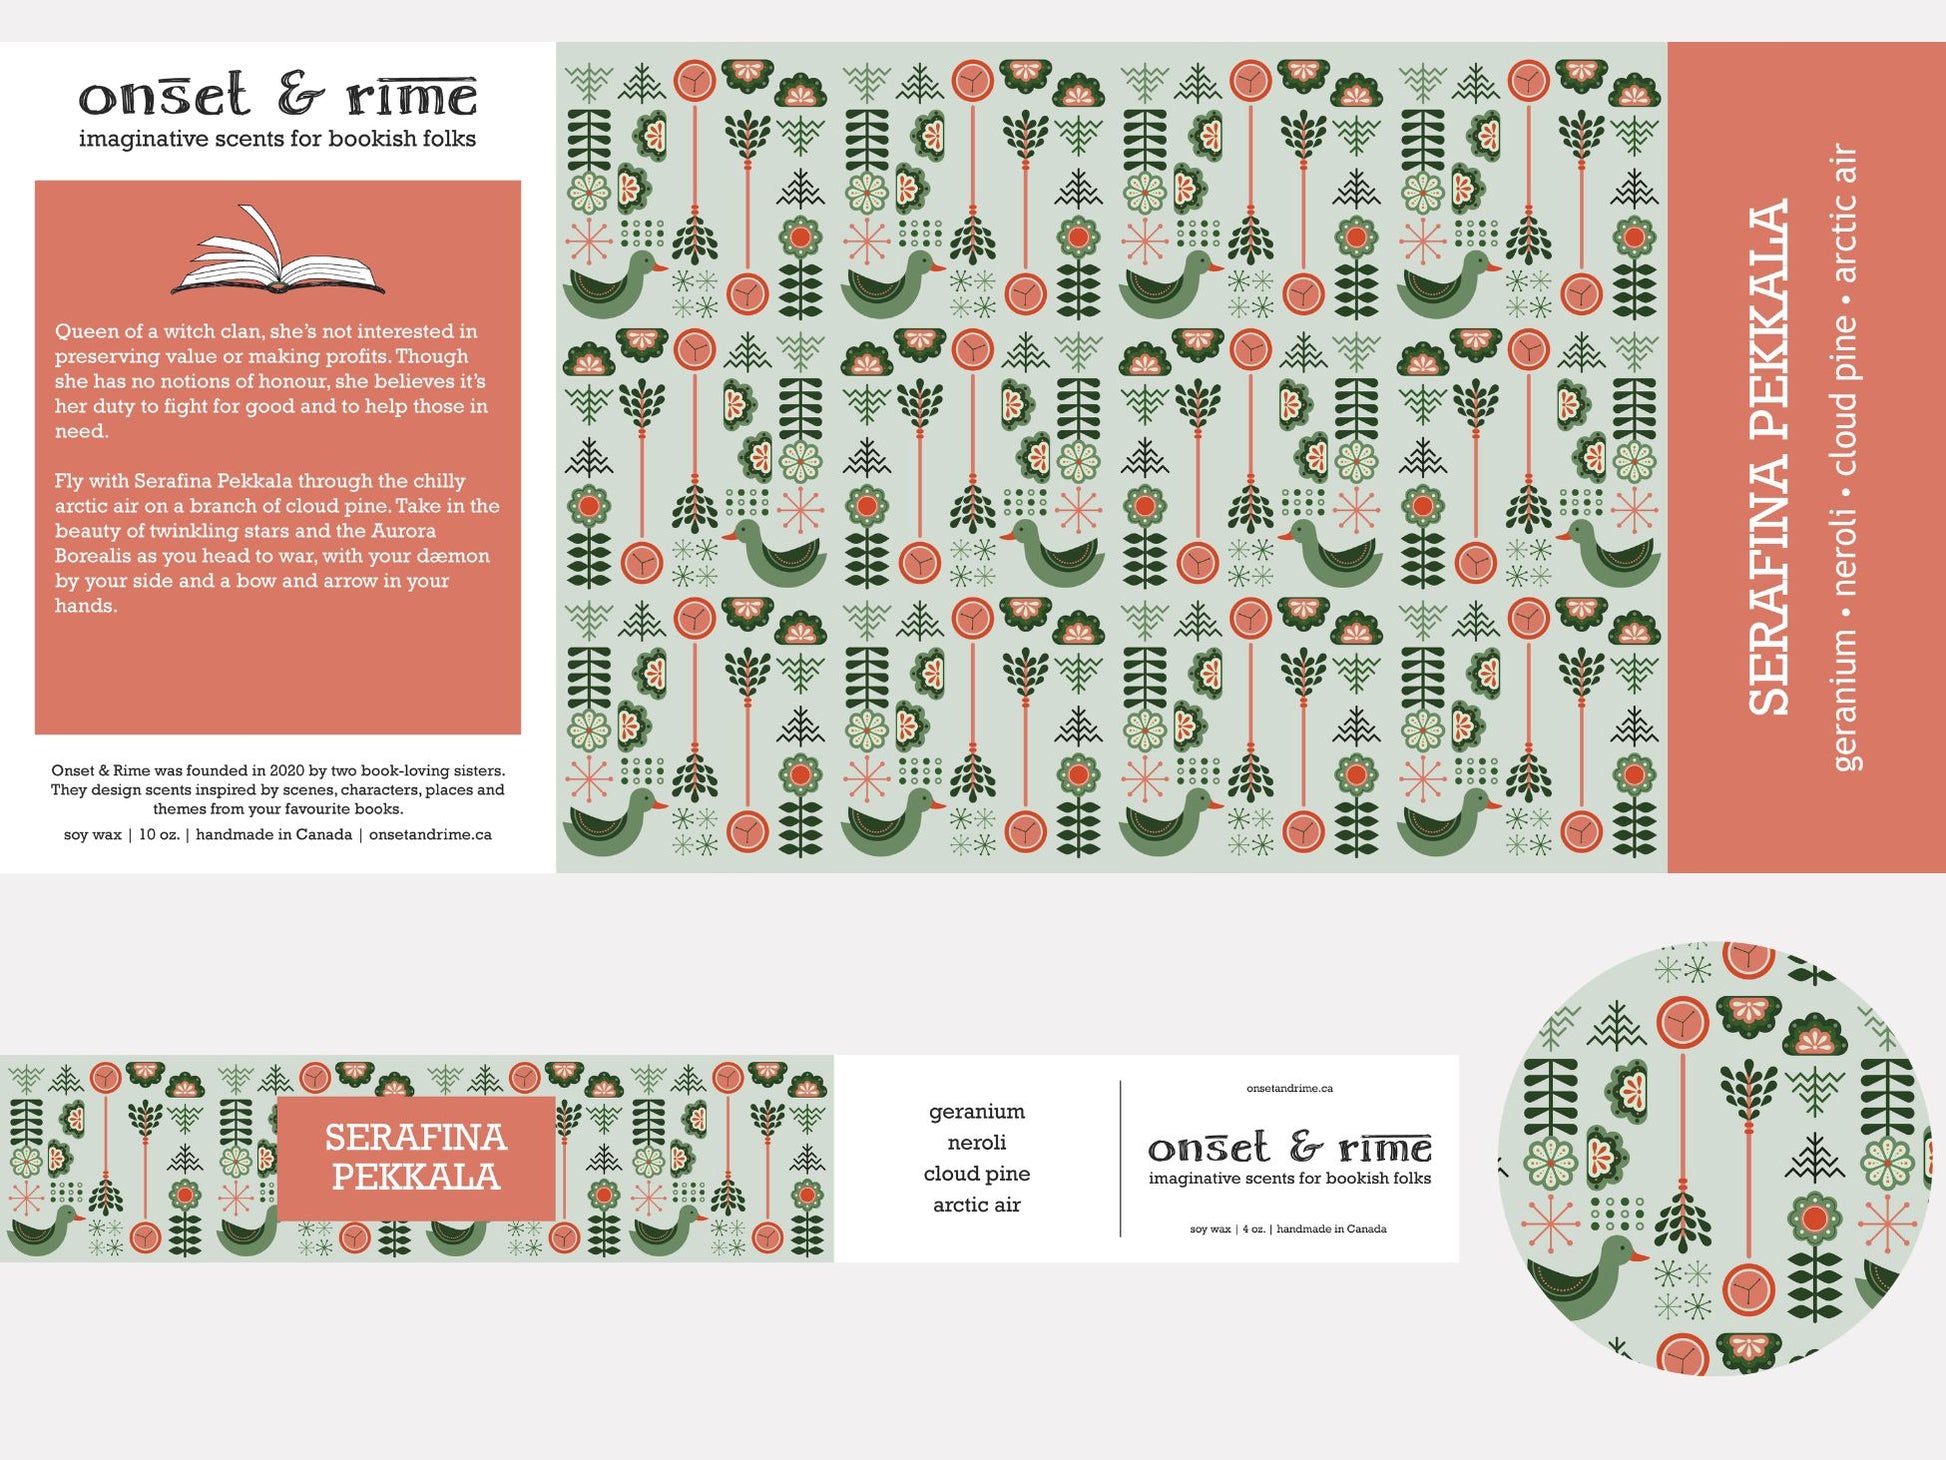 A close up view of the label for the Onset & Rime floral pine scented candle called "Serafina Pekkala". The label is pale green with a pattern of pine branches, compasses, a goose and more arctic symbols. The text on the label is "Serafina Pekkala - Geranium, Neroli, Cloud Pine, Arctic Air".